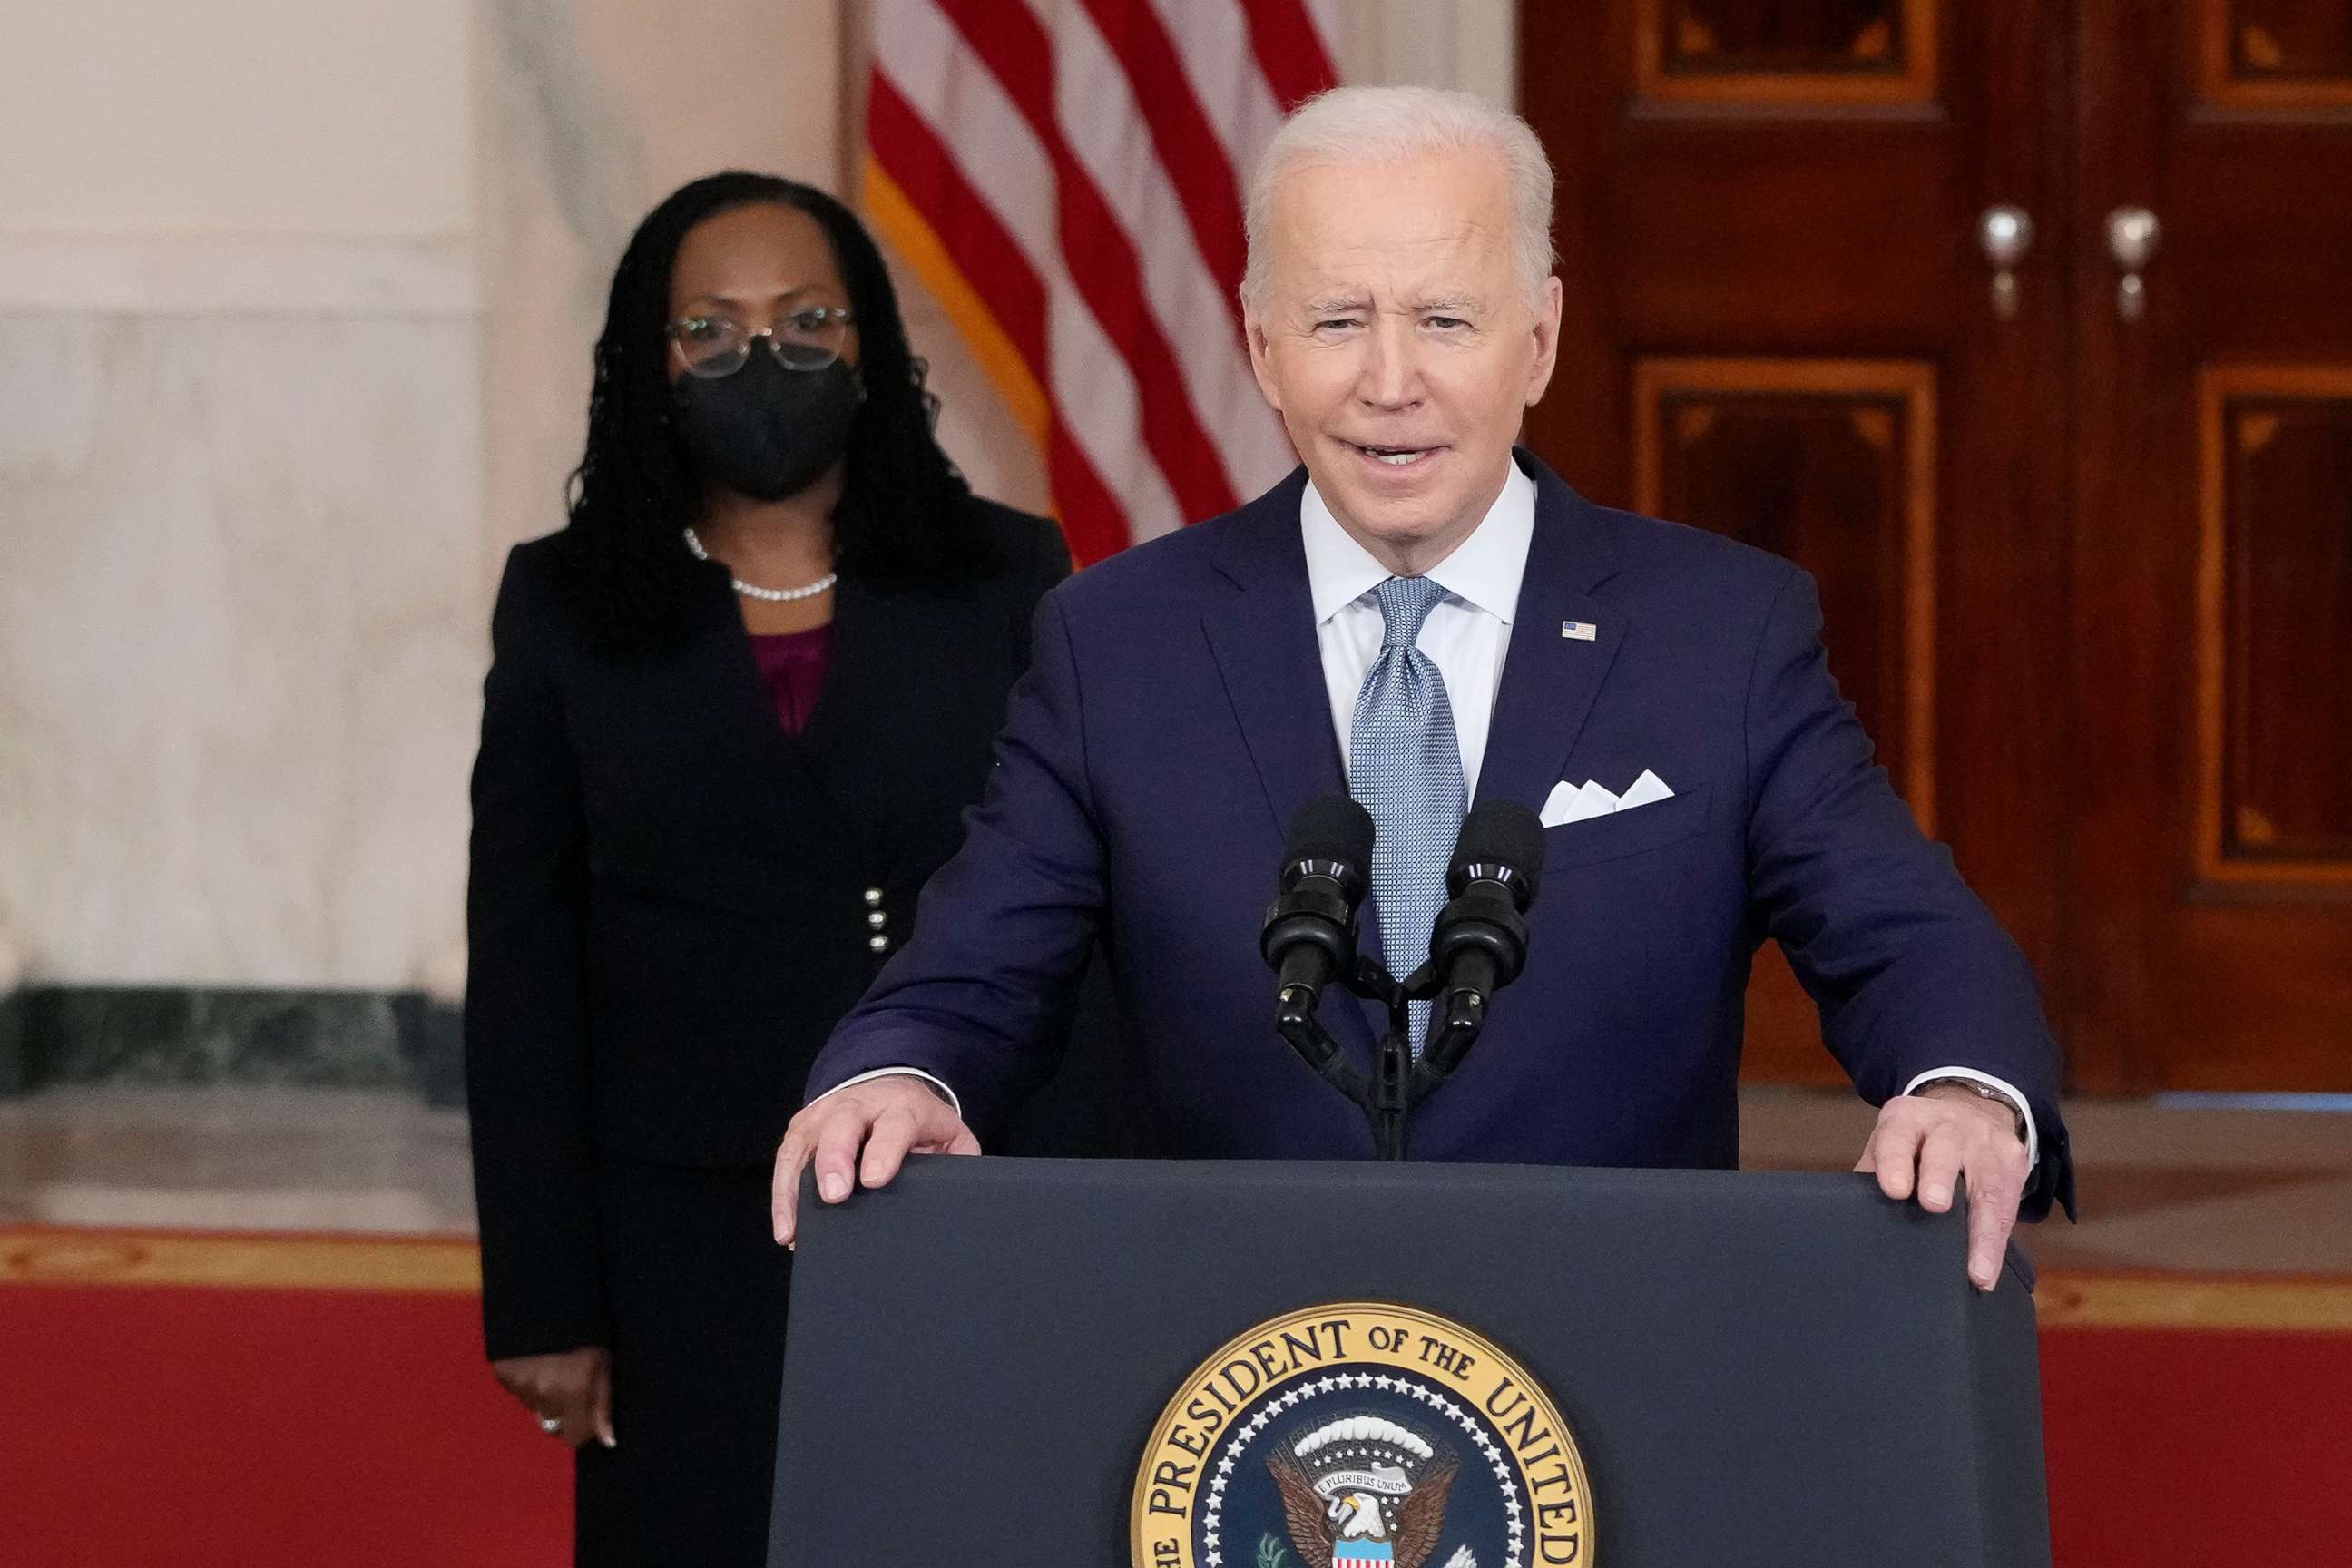 PHOTO: President Joe Biden introduces Ketanji Brown Jackson, a circuit judge on the U.S. Court of Appeals for the District of Columbia Circuit, as his nominee to the U.S. Supreme Court during an event in the Cross Hall of the White House, Feb. 25, 2022.